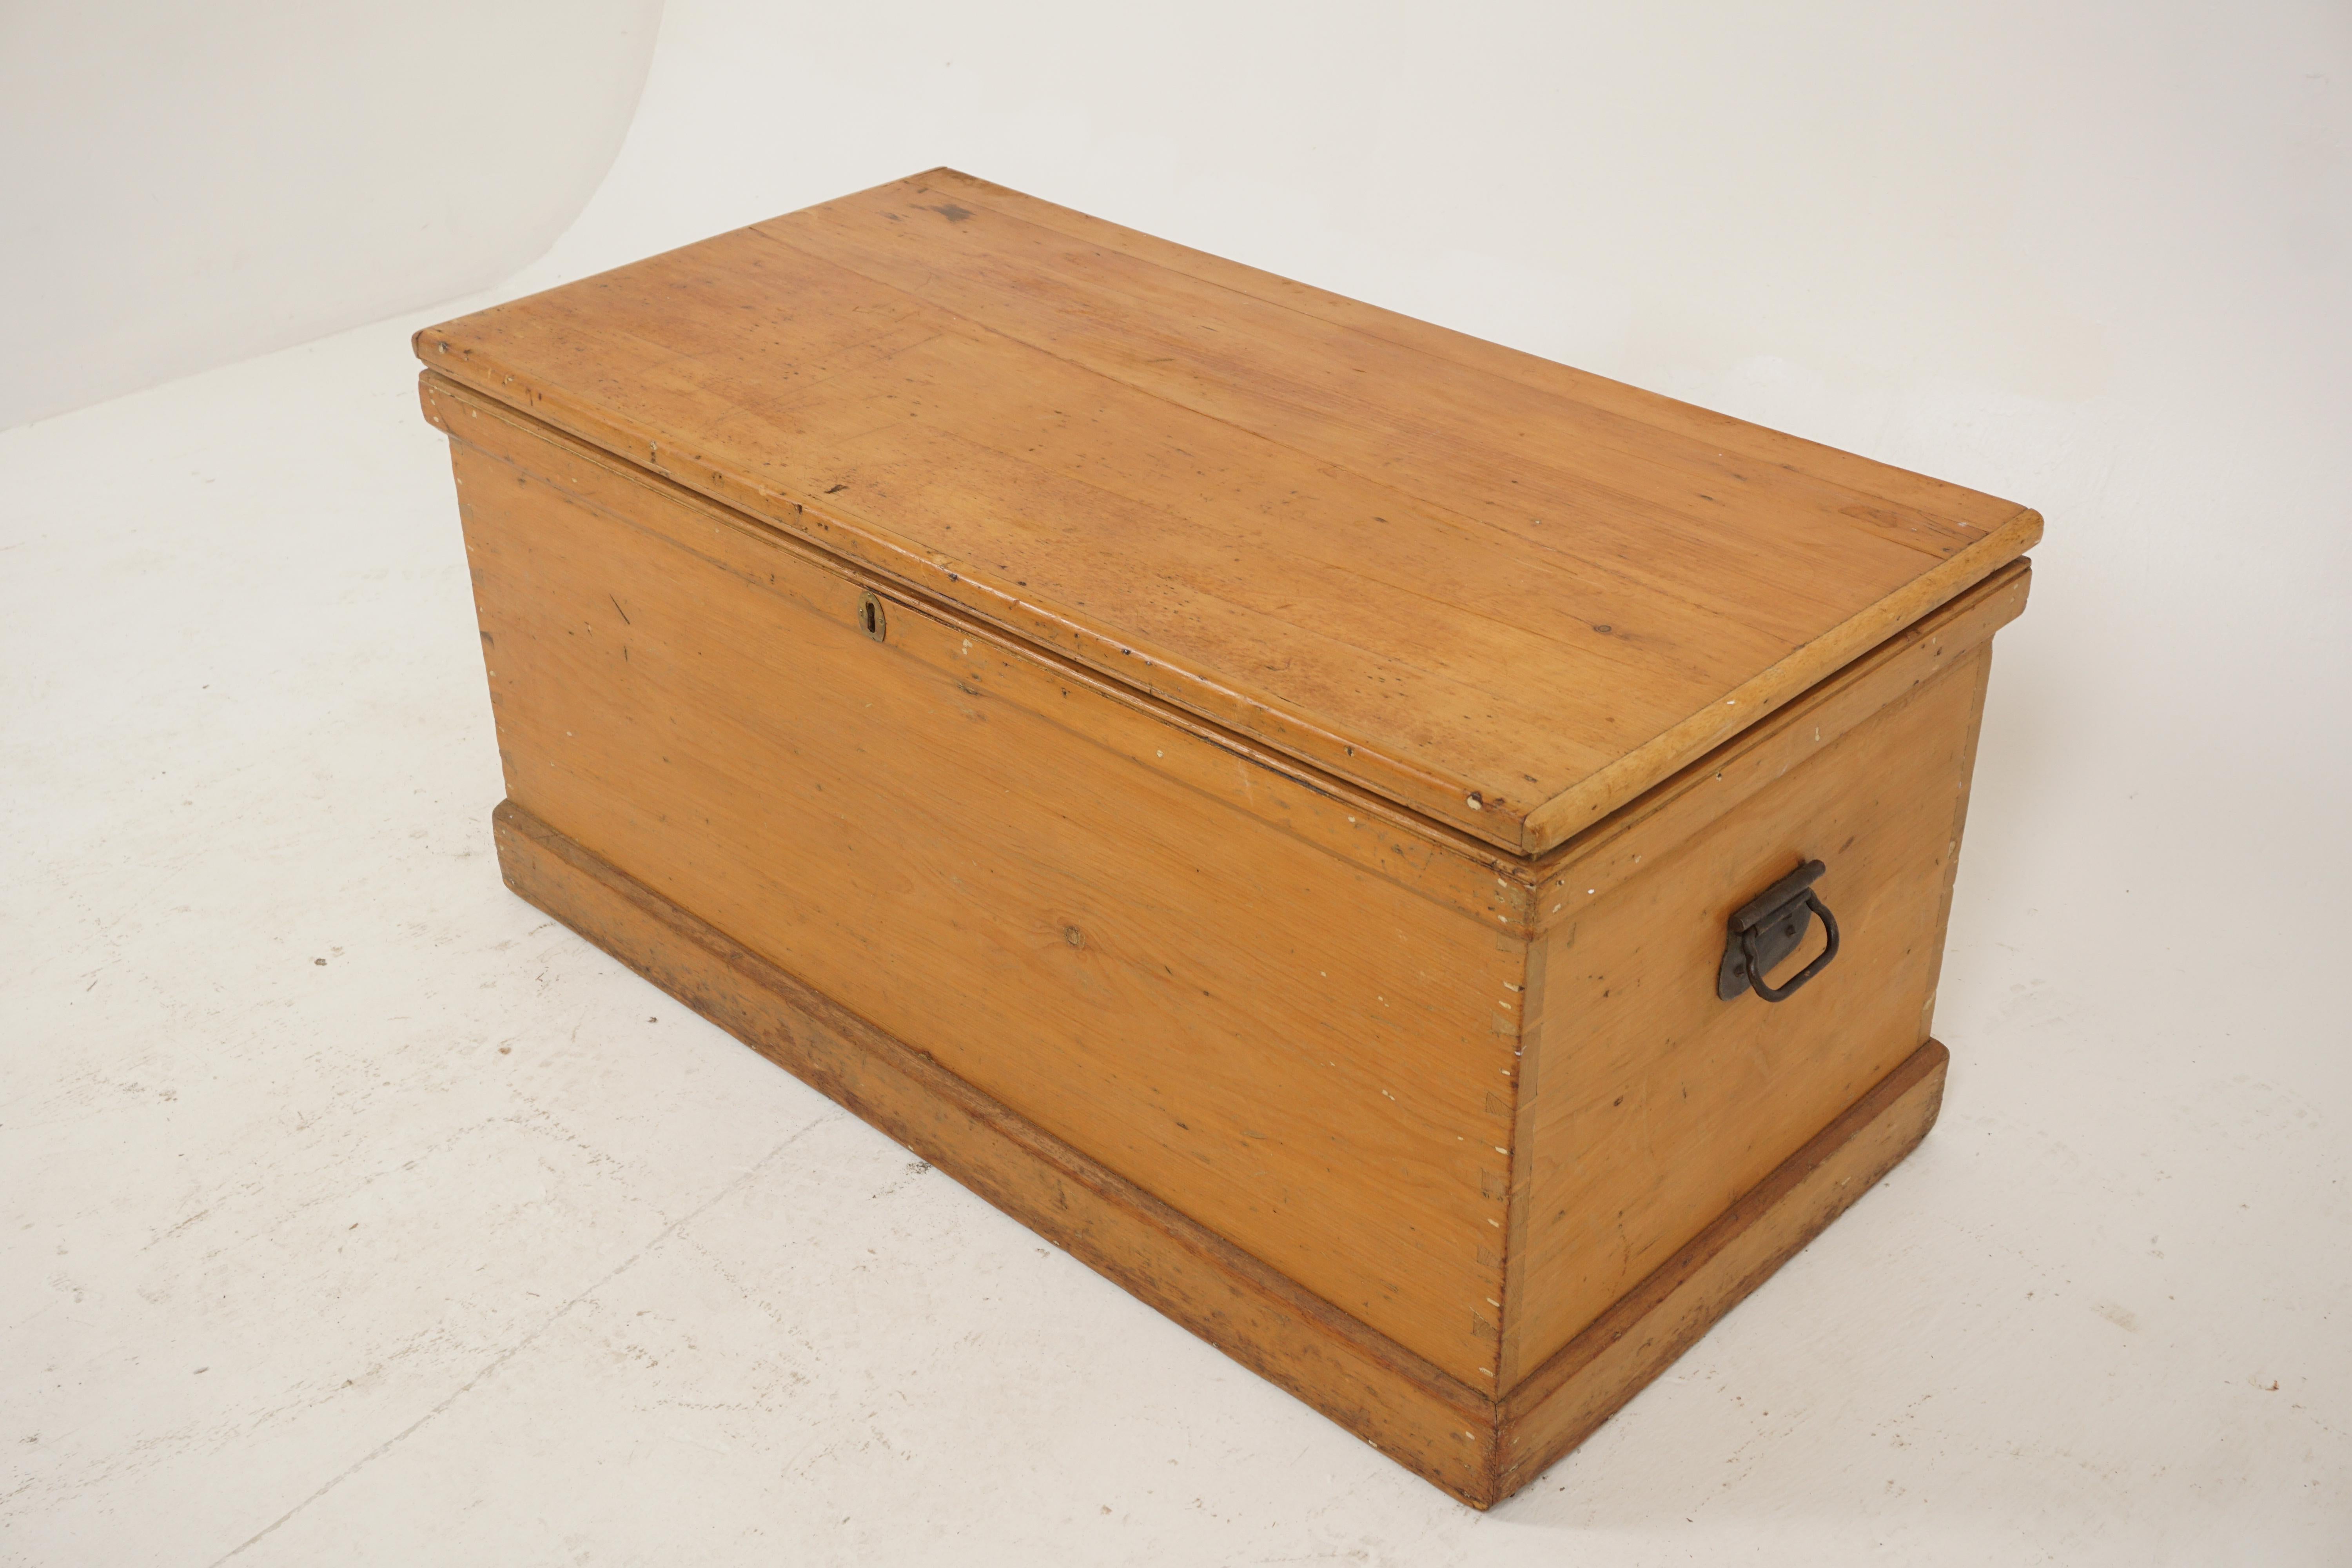 Antique Victorian pine blanket box, coffee table, trunk, Scotland 1890, B2676

Scotland 1890
Solid Pine
Original finish
Rectangular top
All around dovetailed construction
Top opens to reveal candle box and a pair of drawers
Original strap